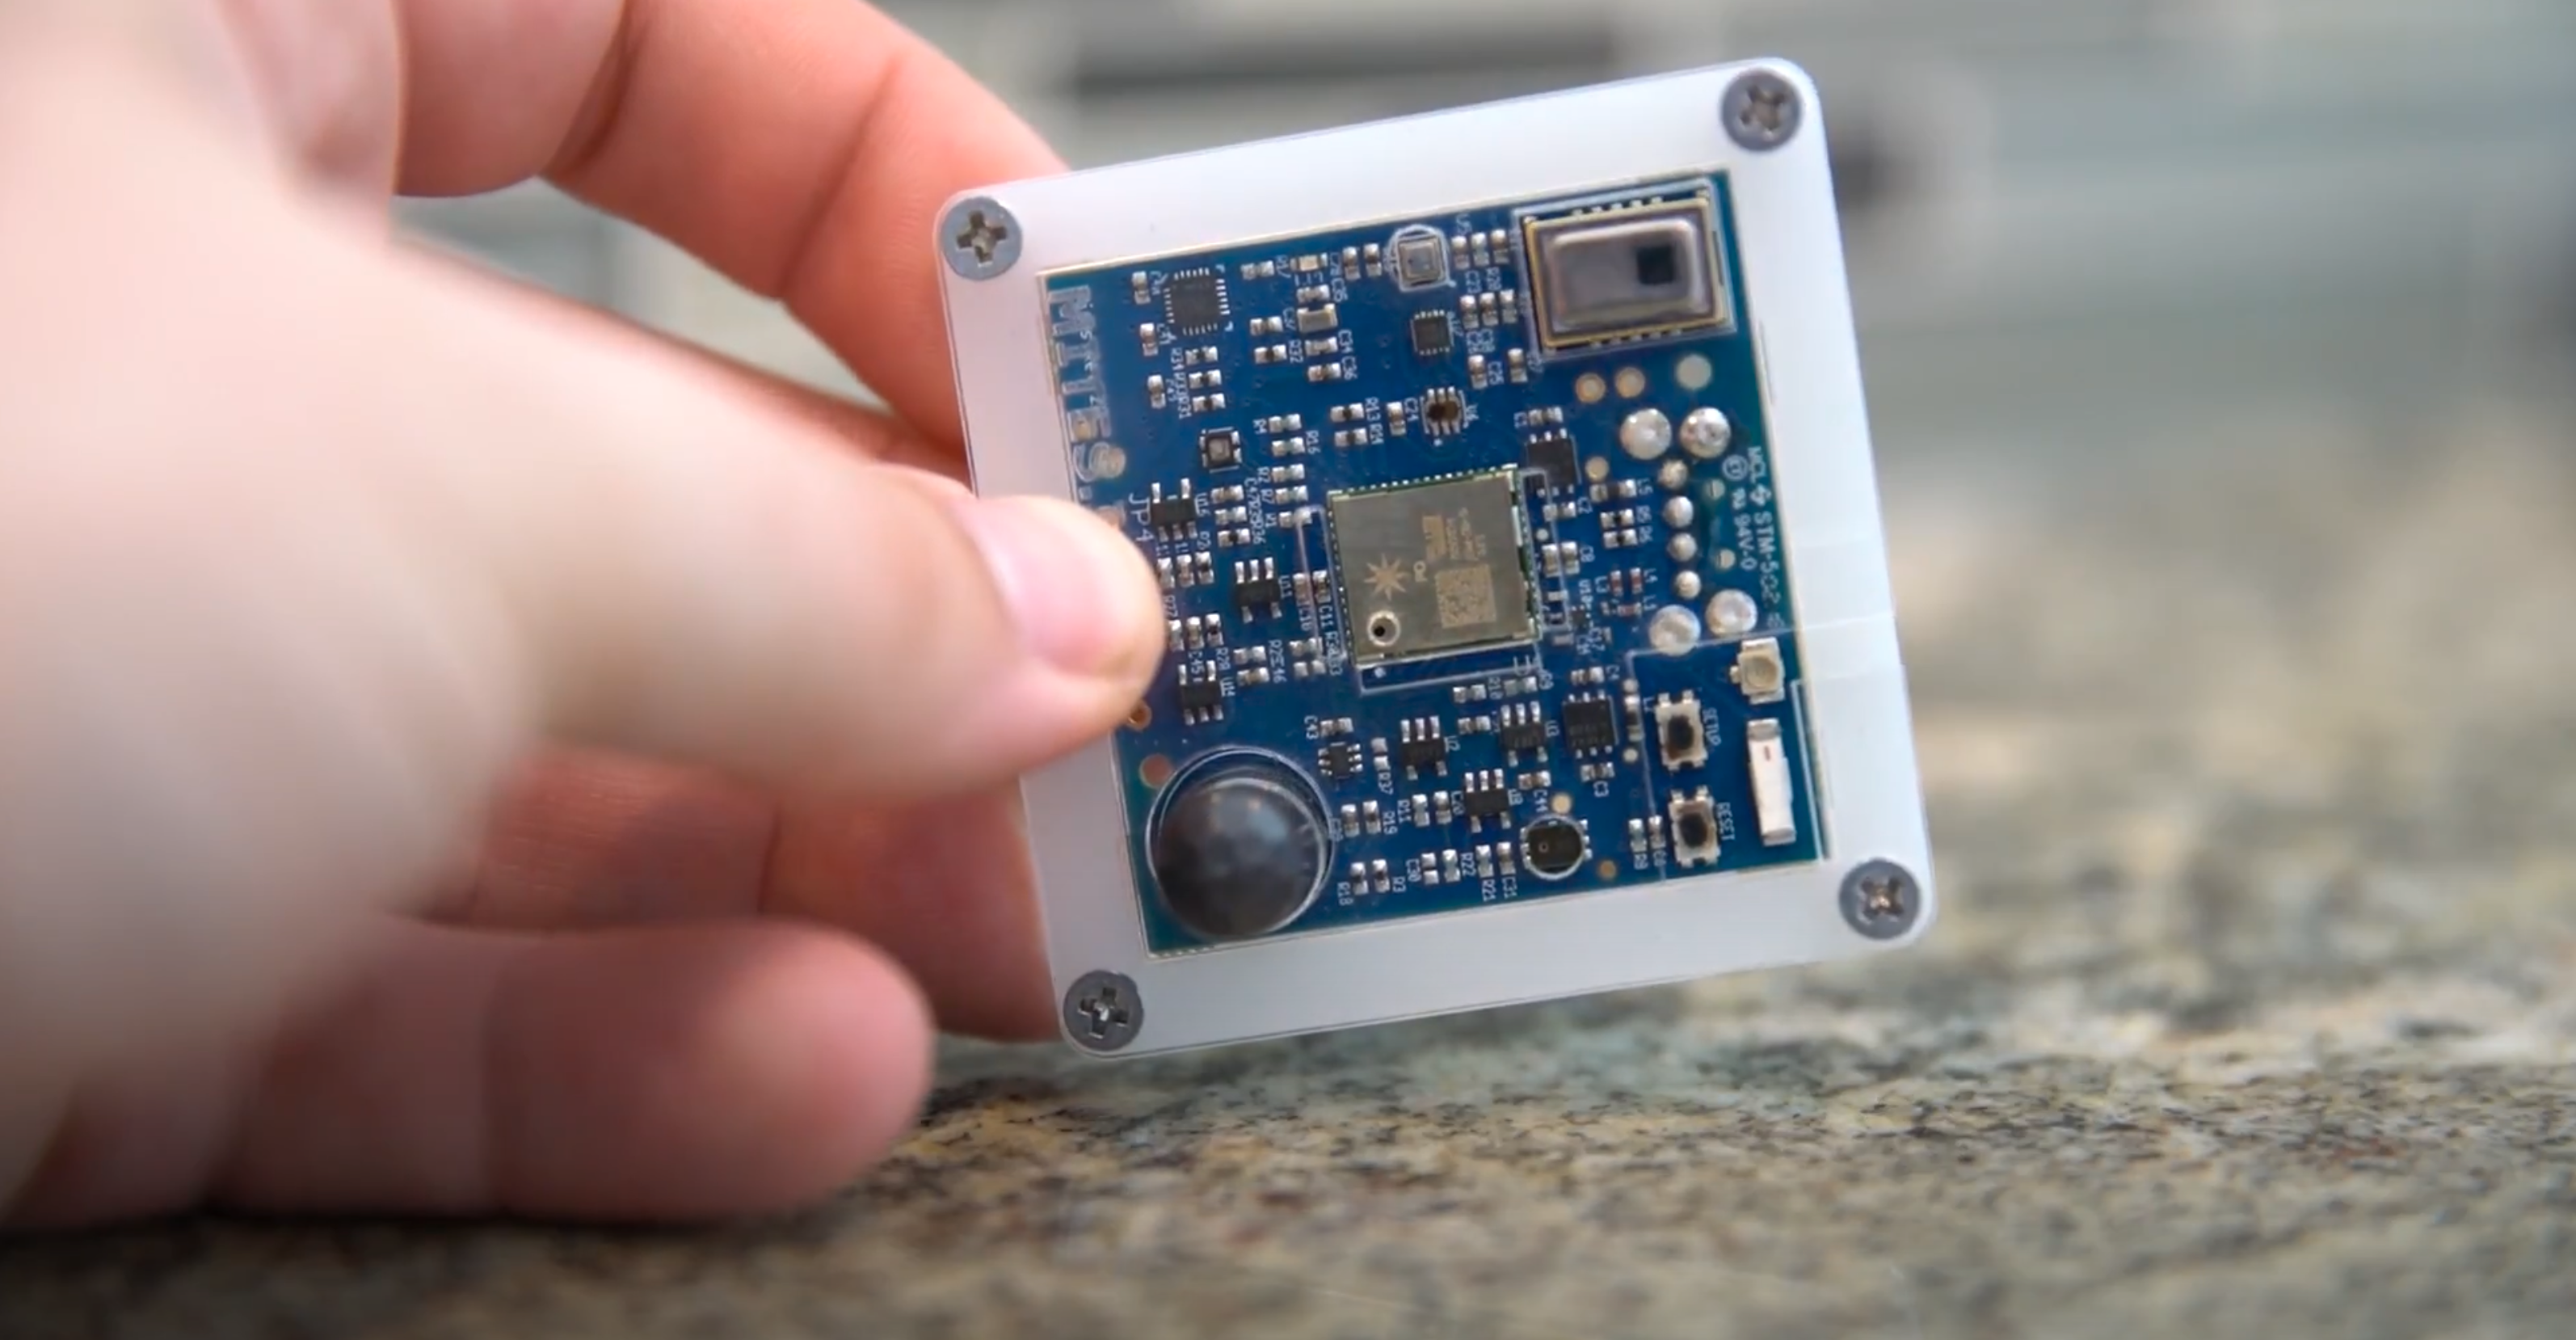 Carnegie Mellon University's research on advanced building sensors provokes heated controversy